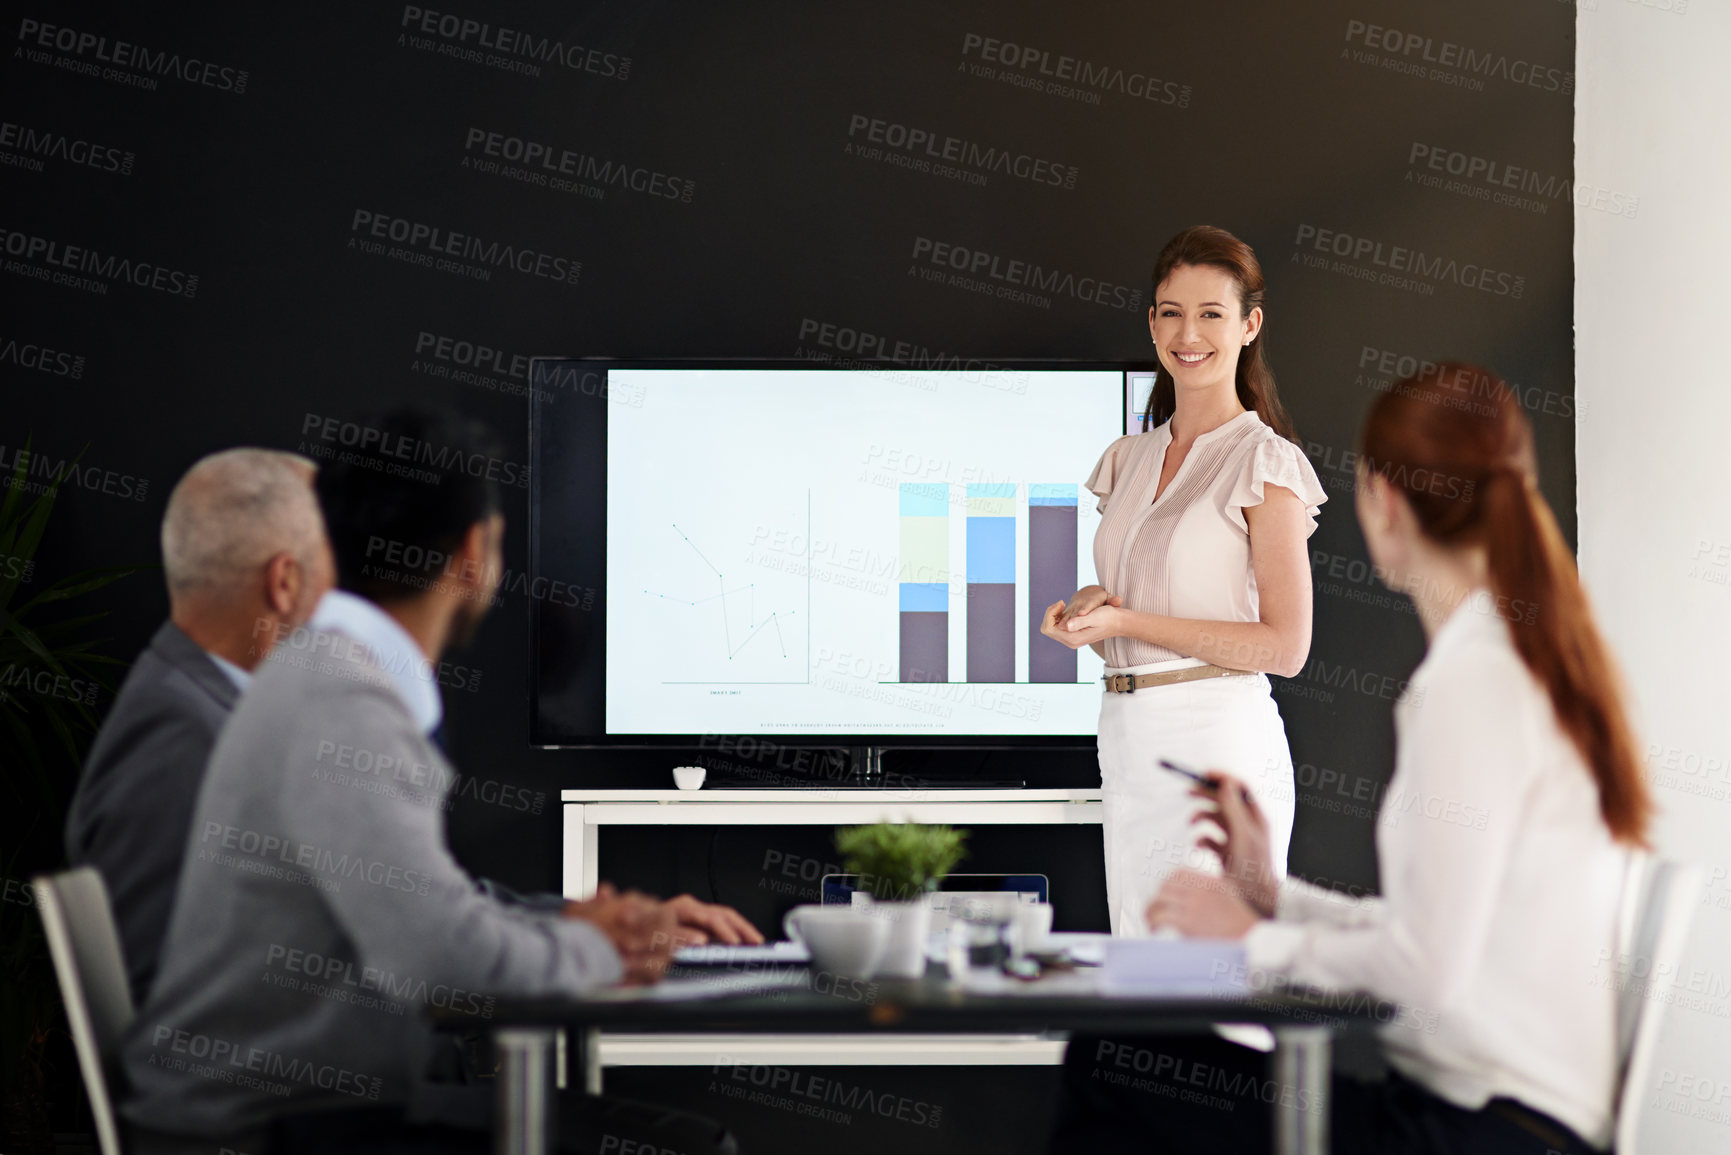 Buy stock photo Cropped shot of a young businesswoman delivering a presentation in a boardroom